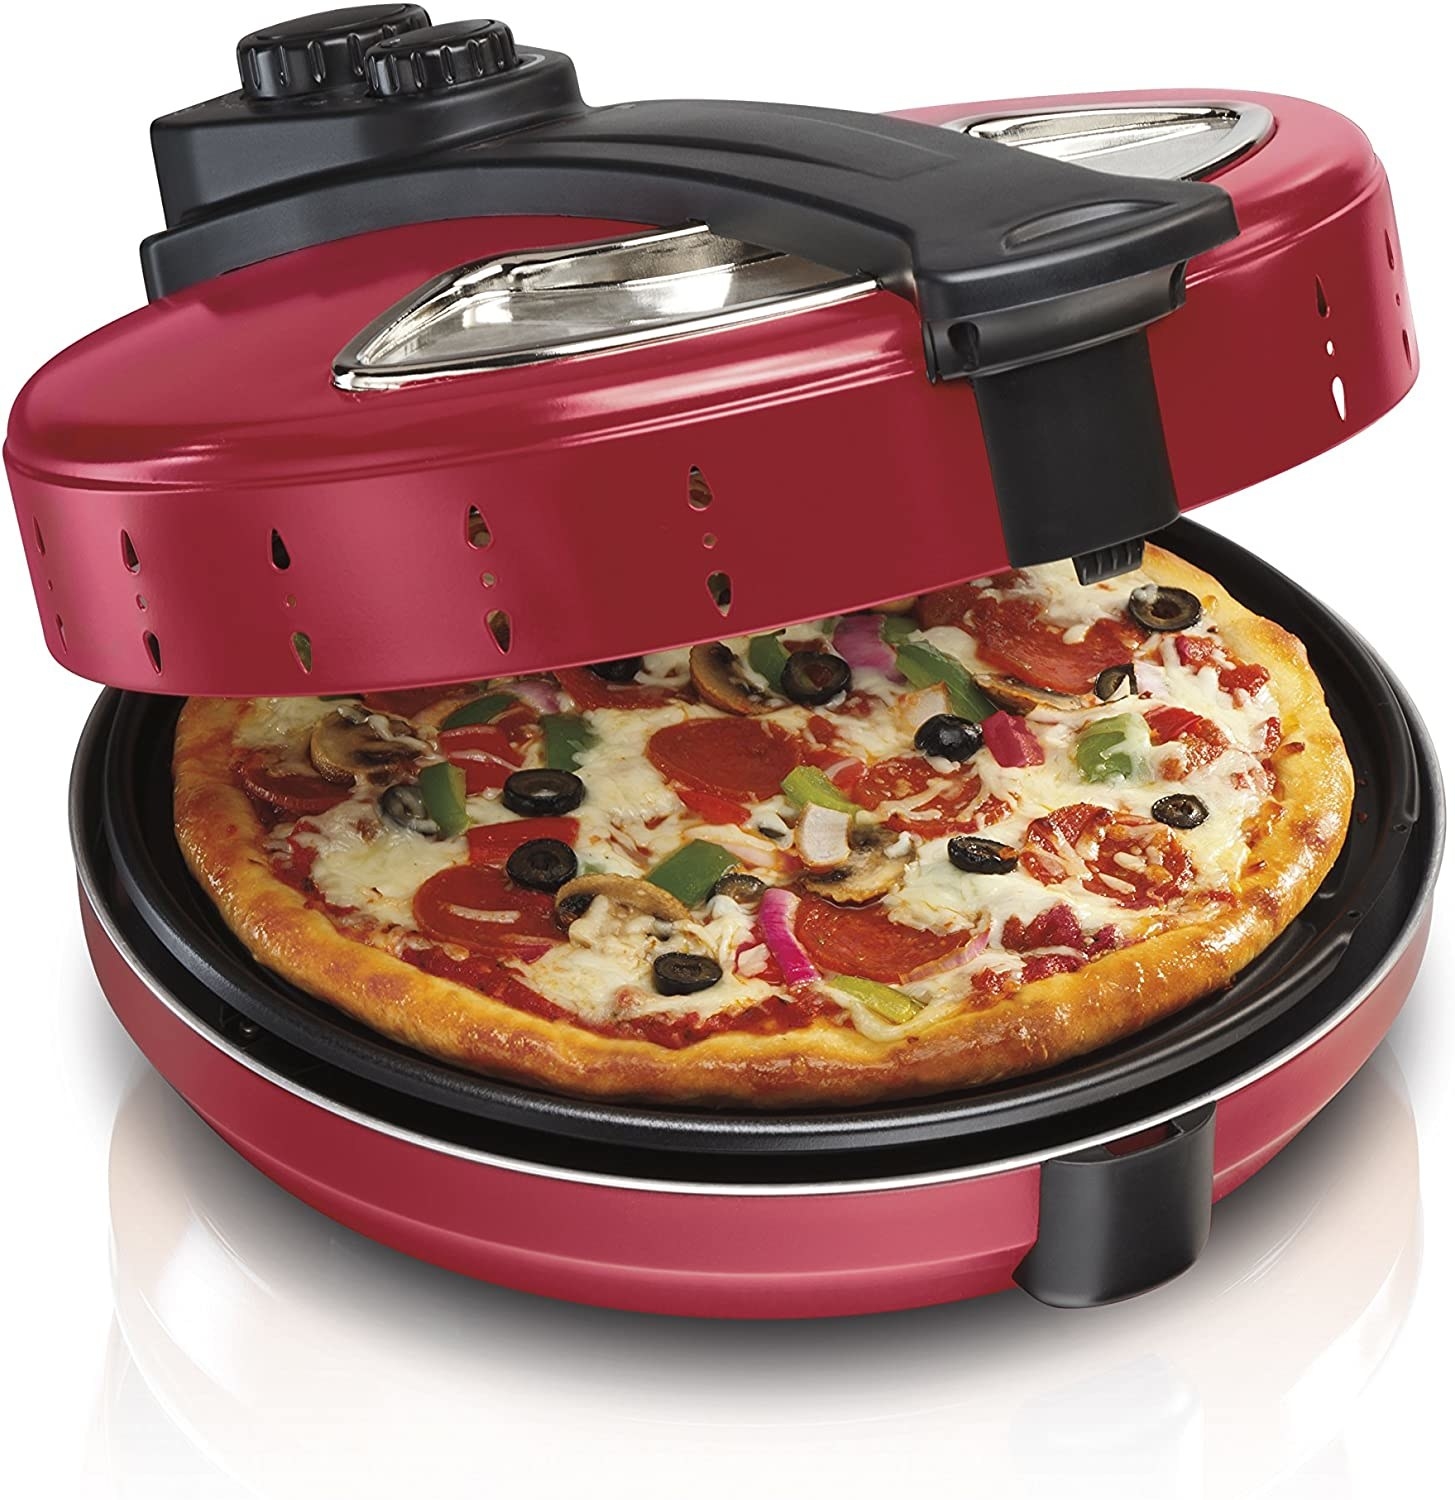 A pizza inside the pizza maker